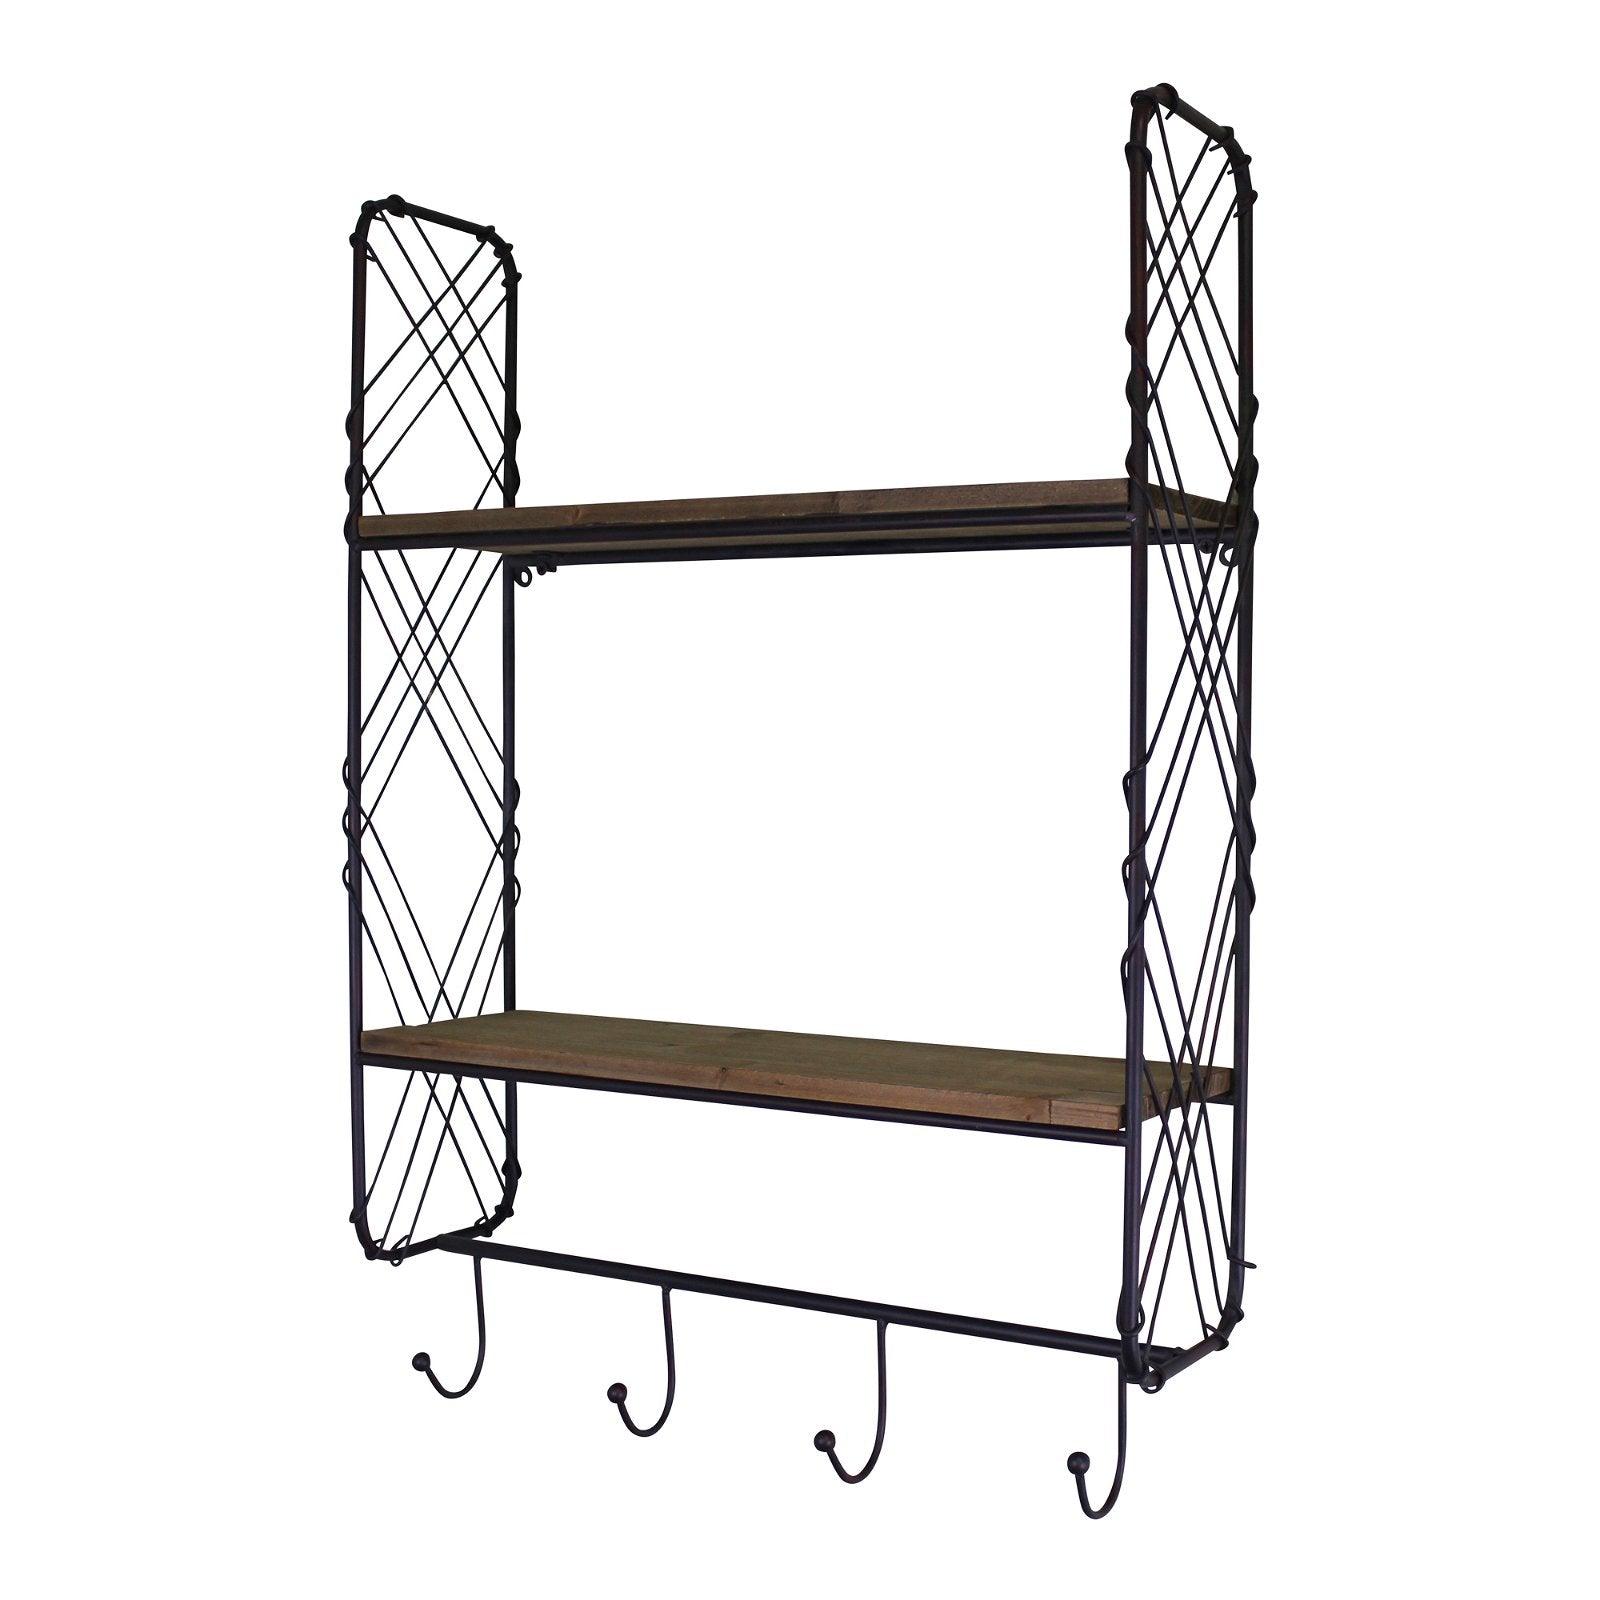 Industrial Style Wall Shelving Unit With Coat Hooks - £38.99 - Wall Hanging Shelving 